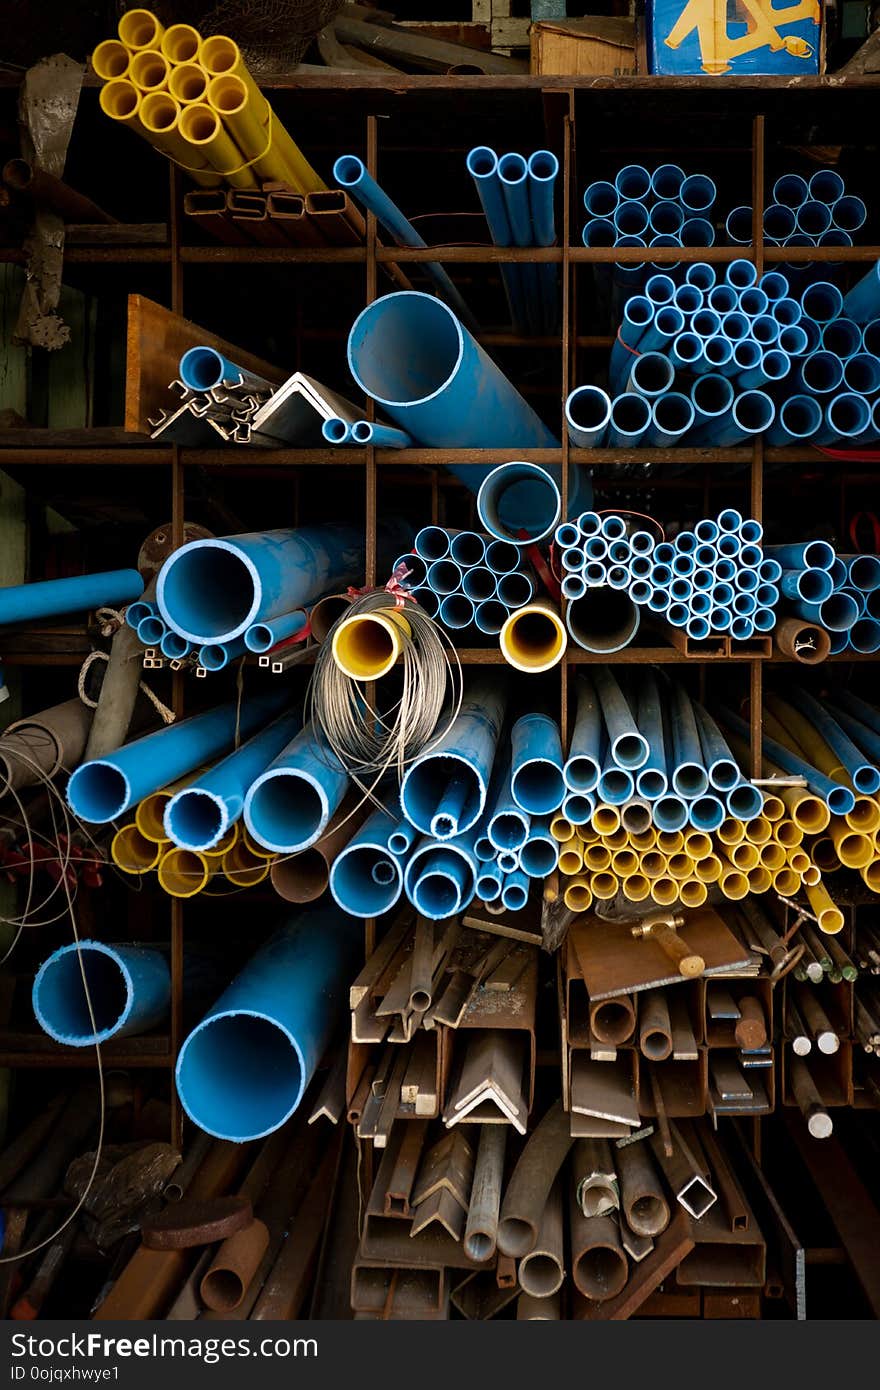 Blue and yellow PVC pipes in warehouse.